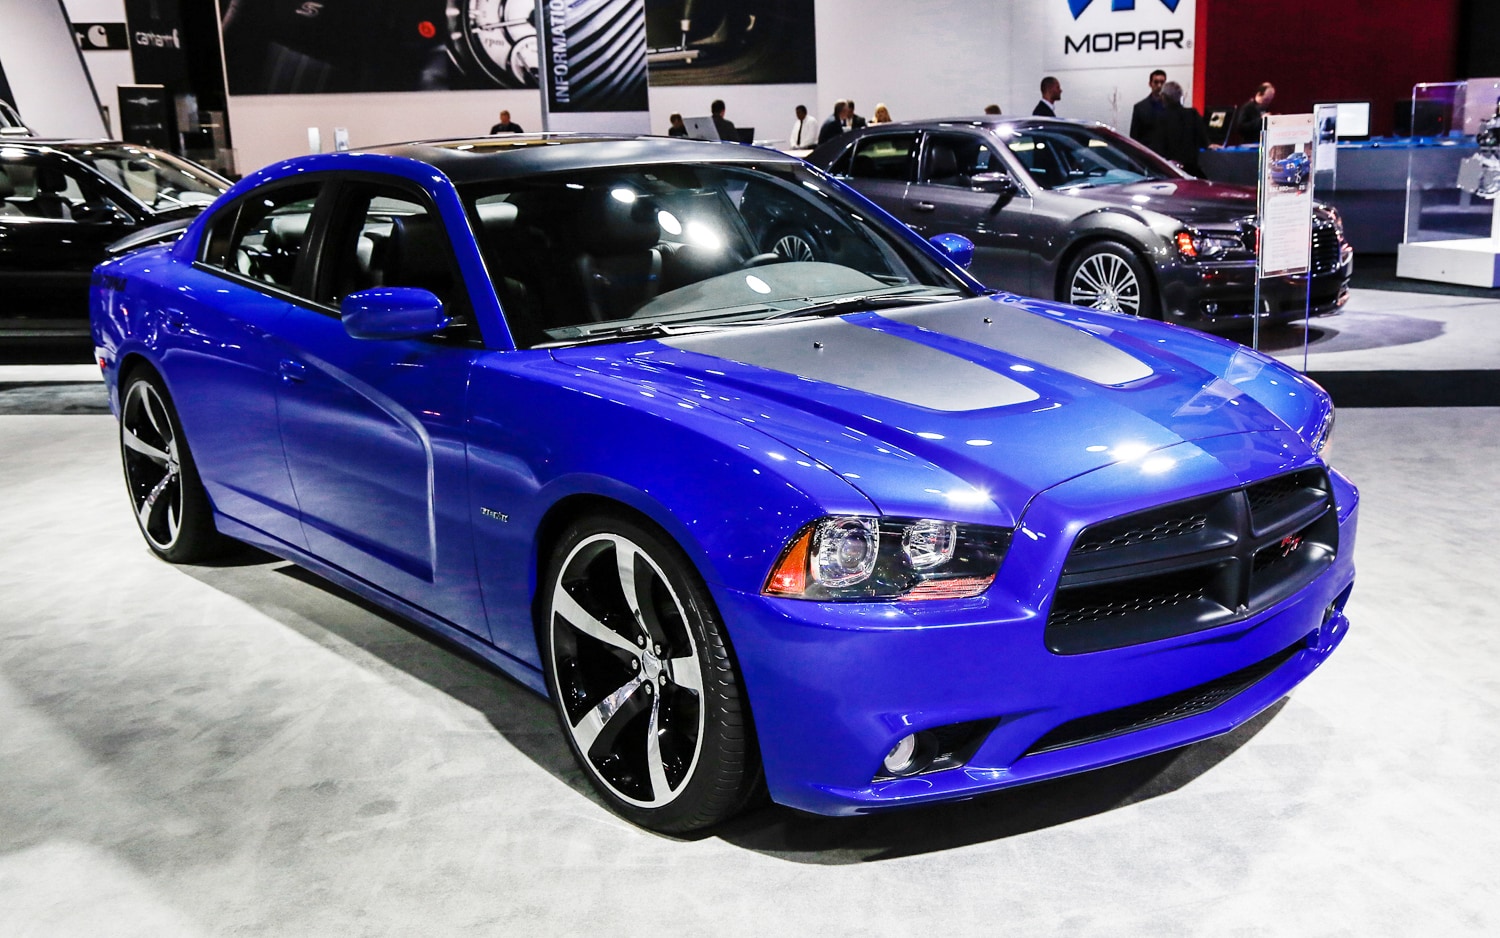 2013 Dodge Charger R/T Dressed Up In New Daytona Package